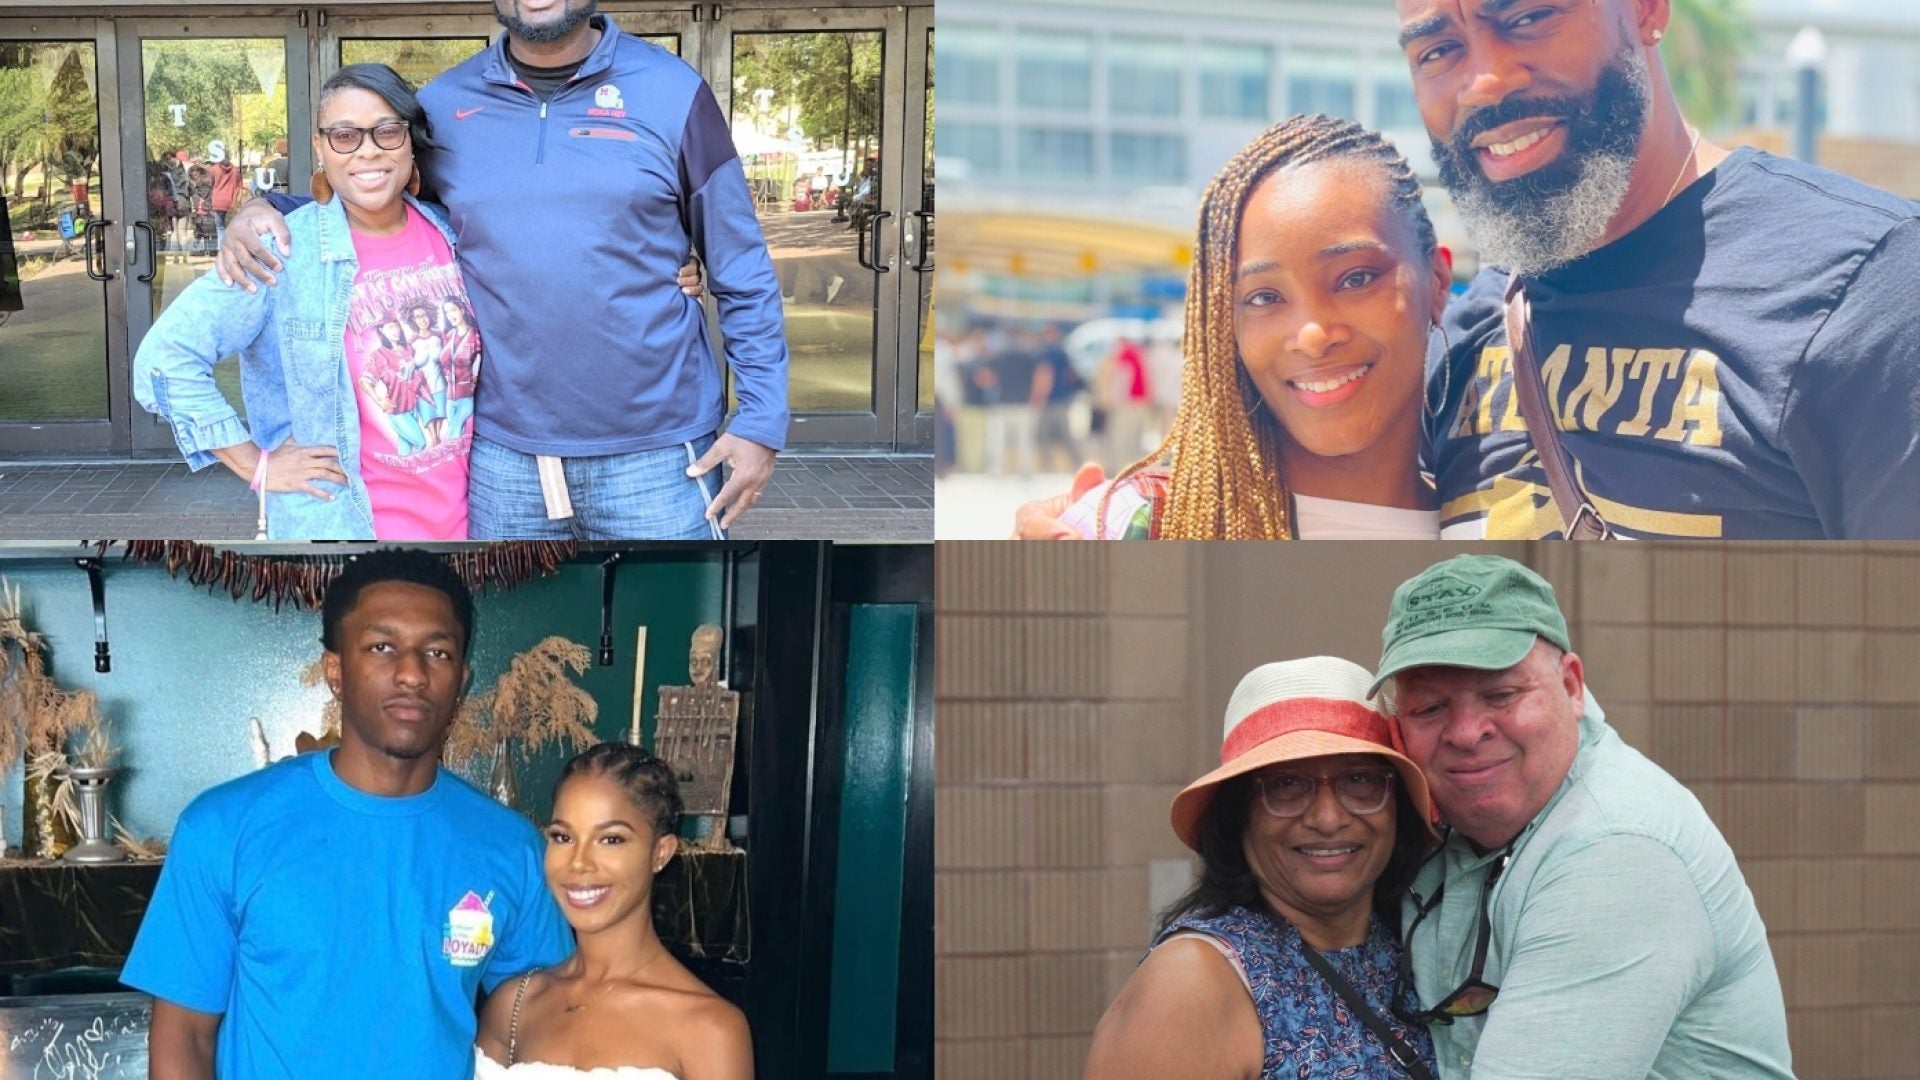 'I Never Gave Up On Love': Couples At ESSENCE Fest Share How They Met And Their Best Relationship Advice